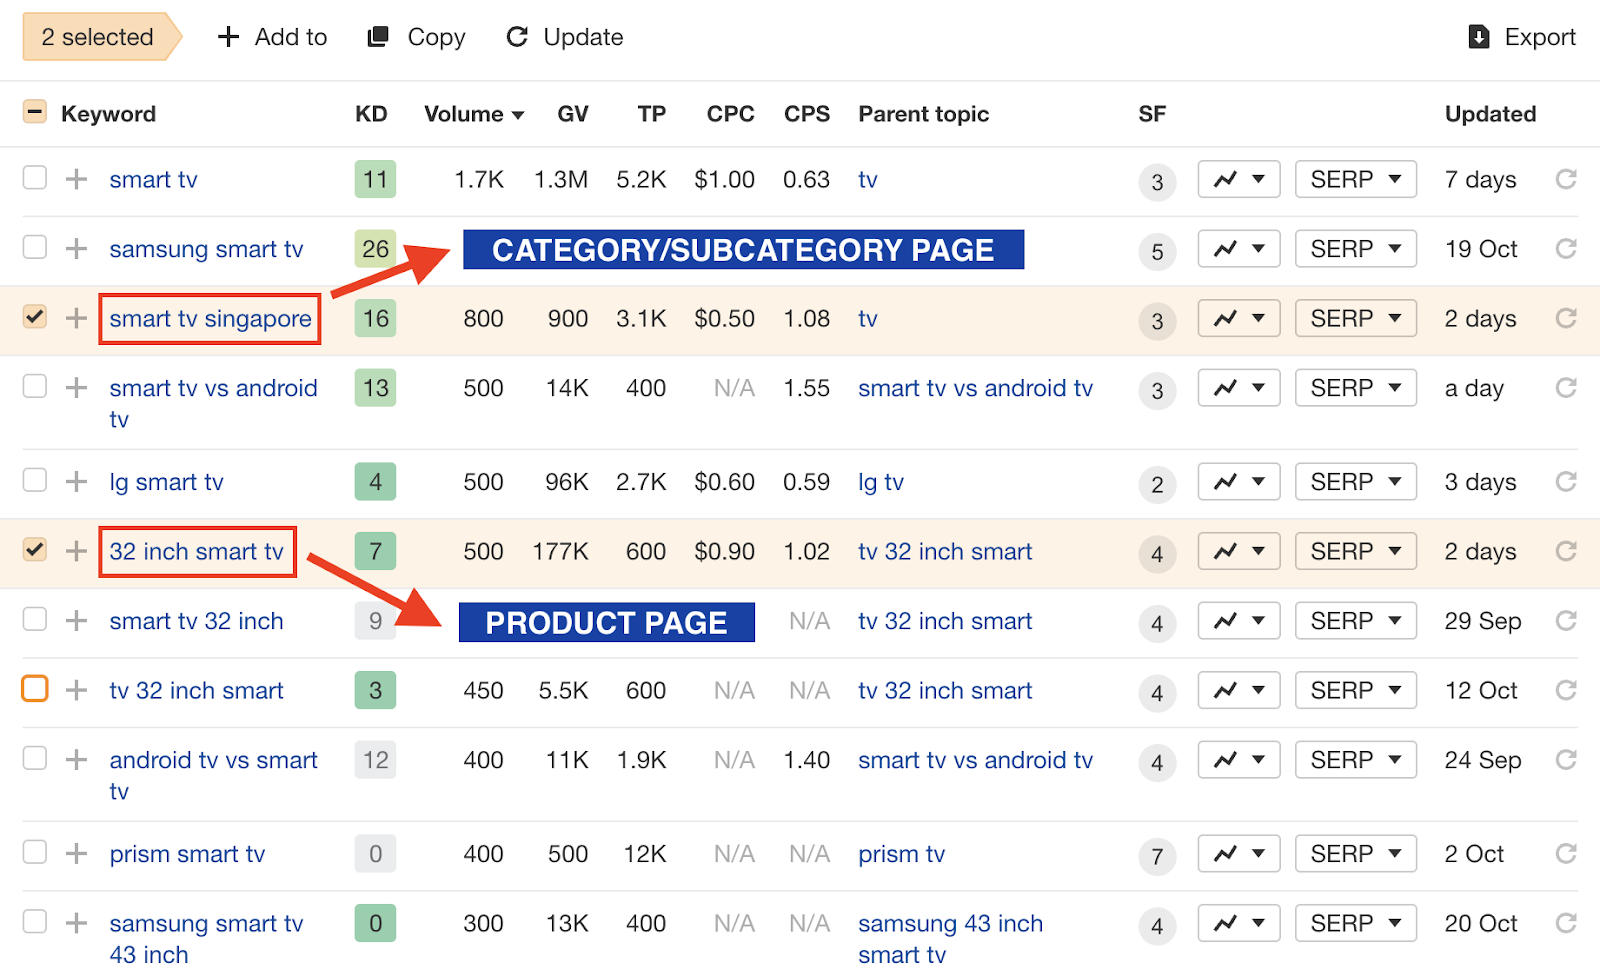 examples of category and product page keywords